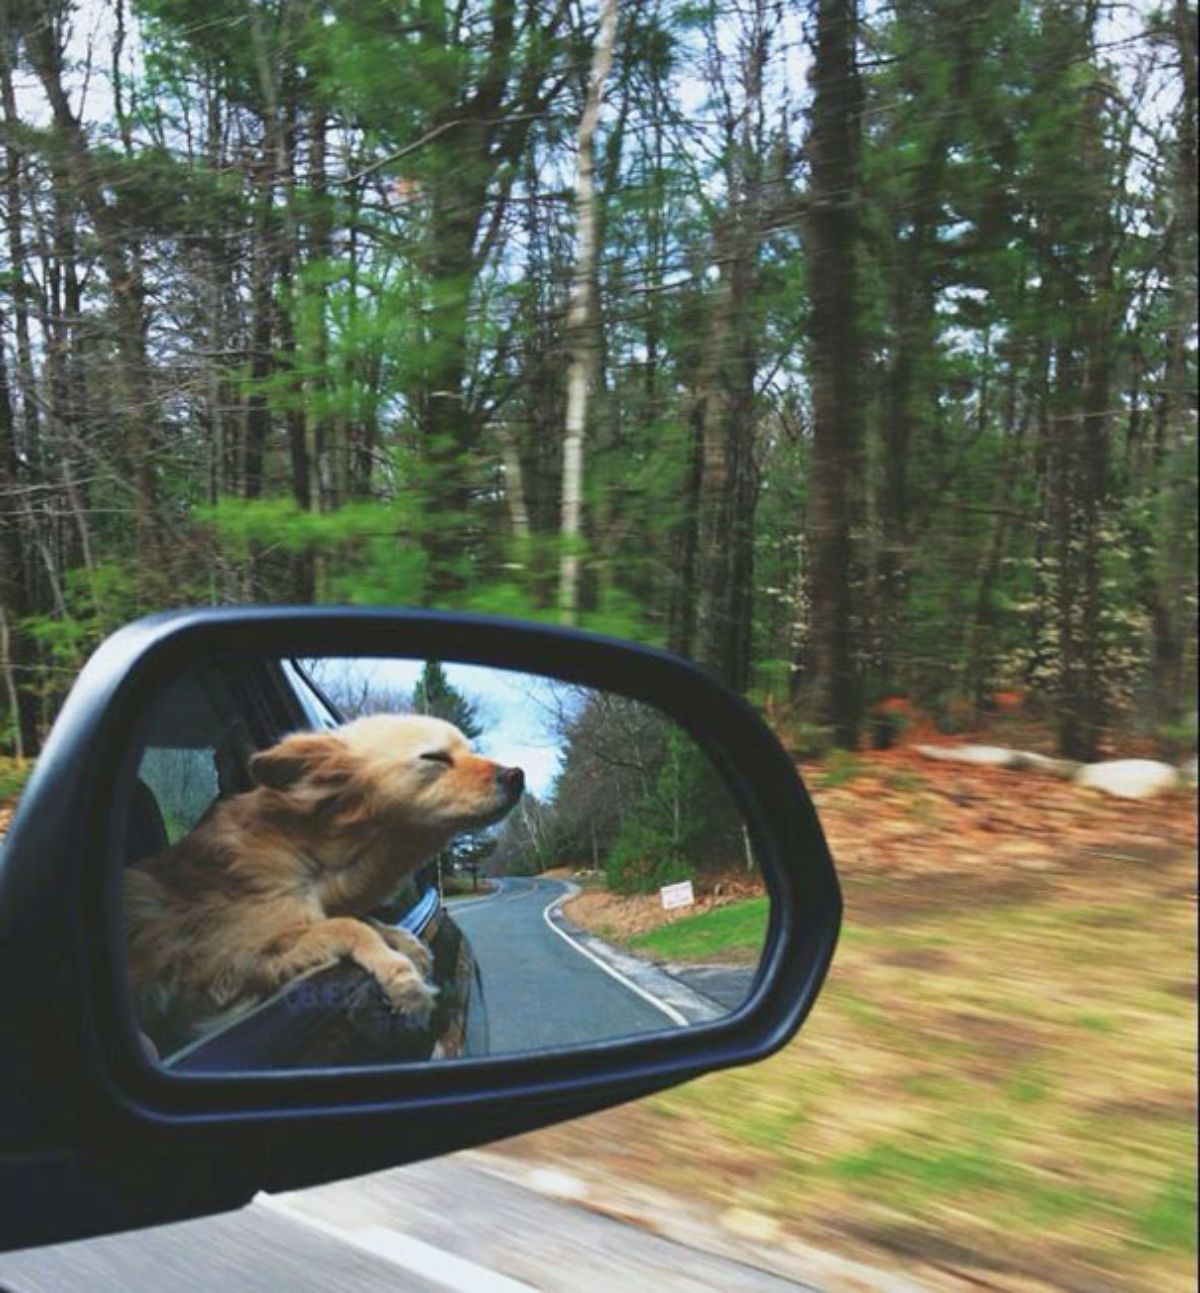 golden retriever leaning out of a moving car seen through a side mirror